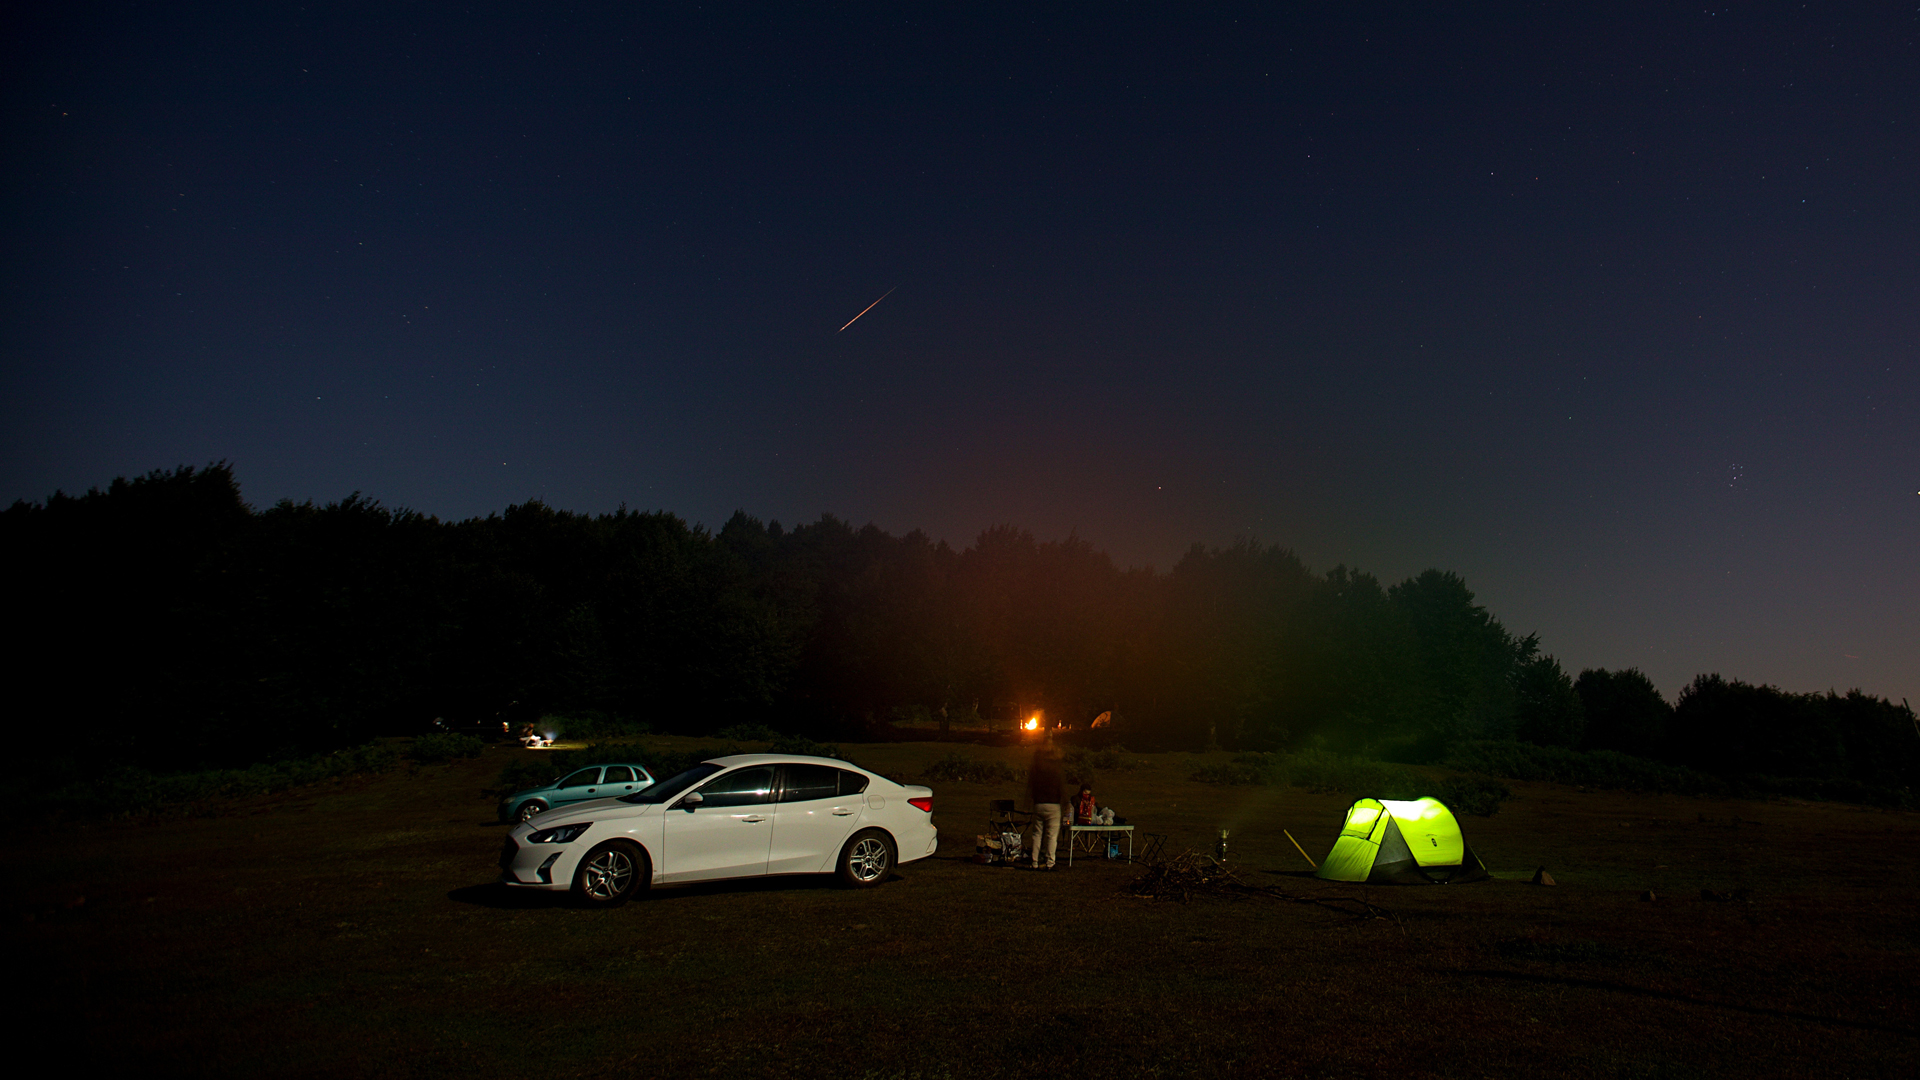 A Perseid meteor streaksover a campsite with a green tent in Turkey